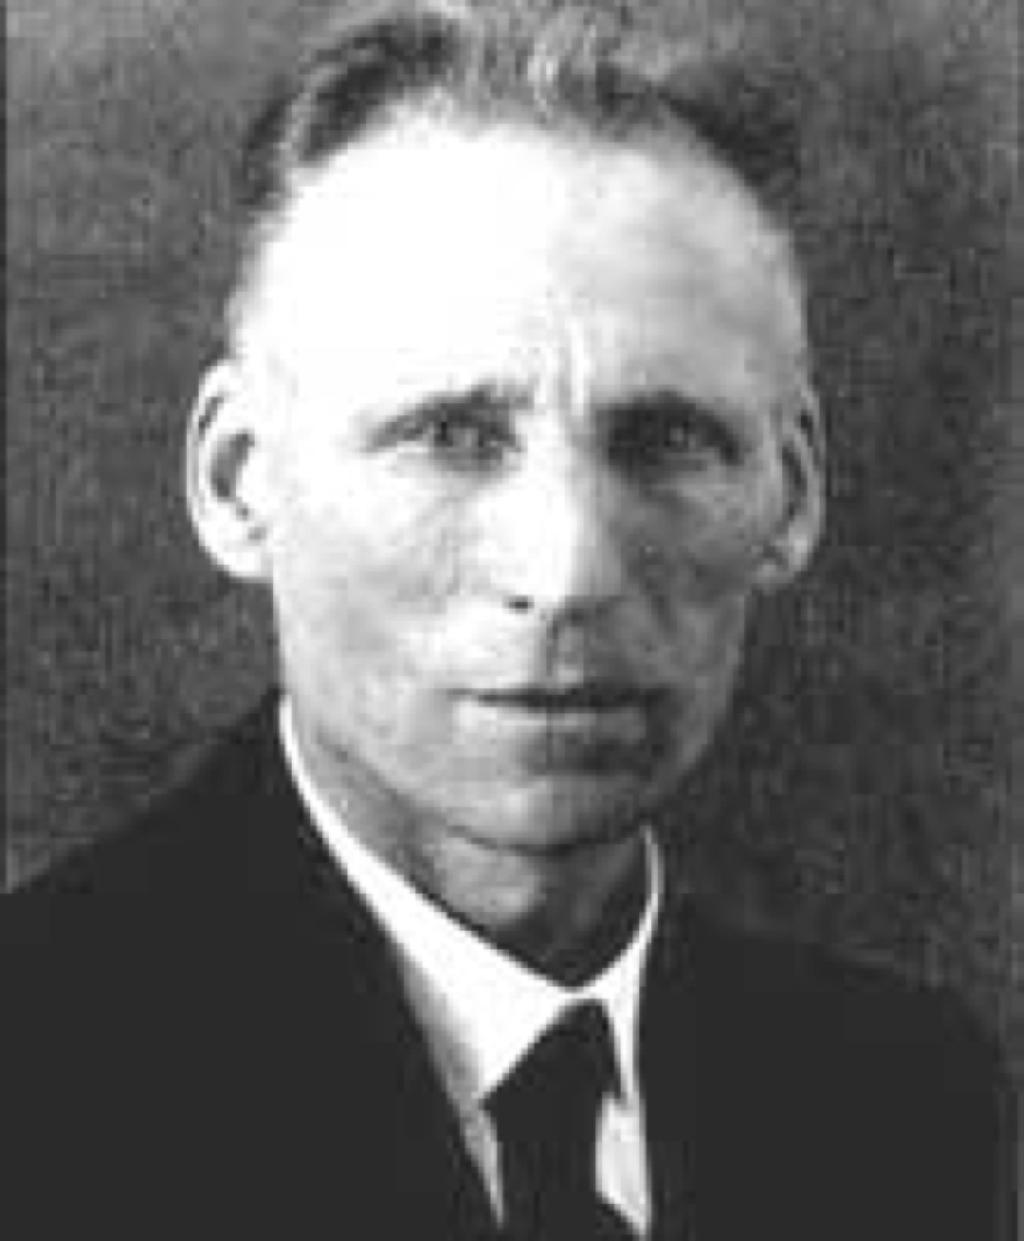 Intuitionism Brouwer (1881-1966) The Dutch Mathematician Brouwer developed Intuitionism in the first half of the 20th century.